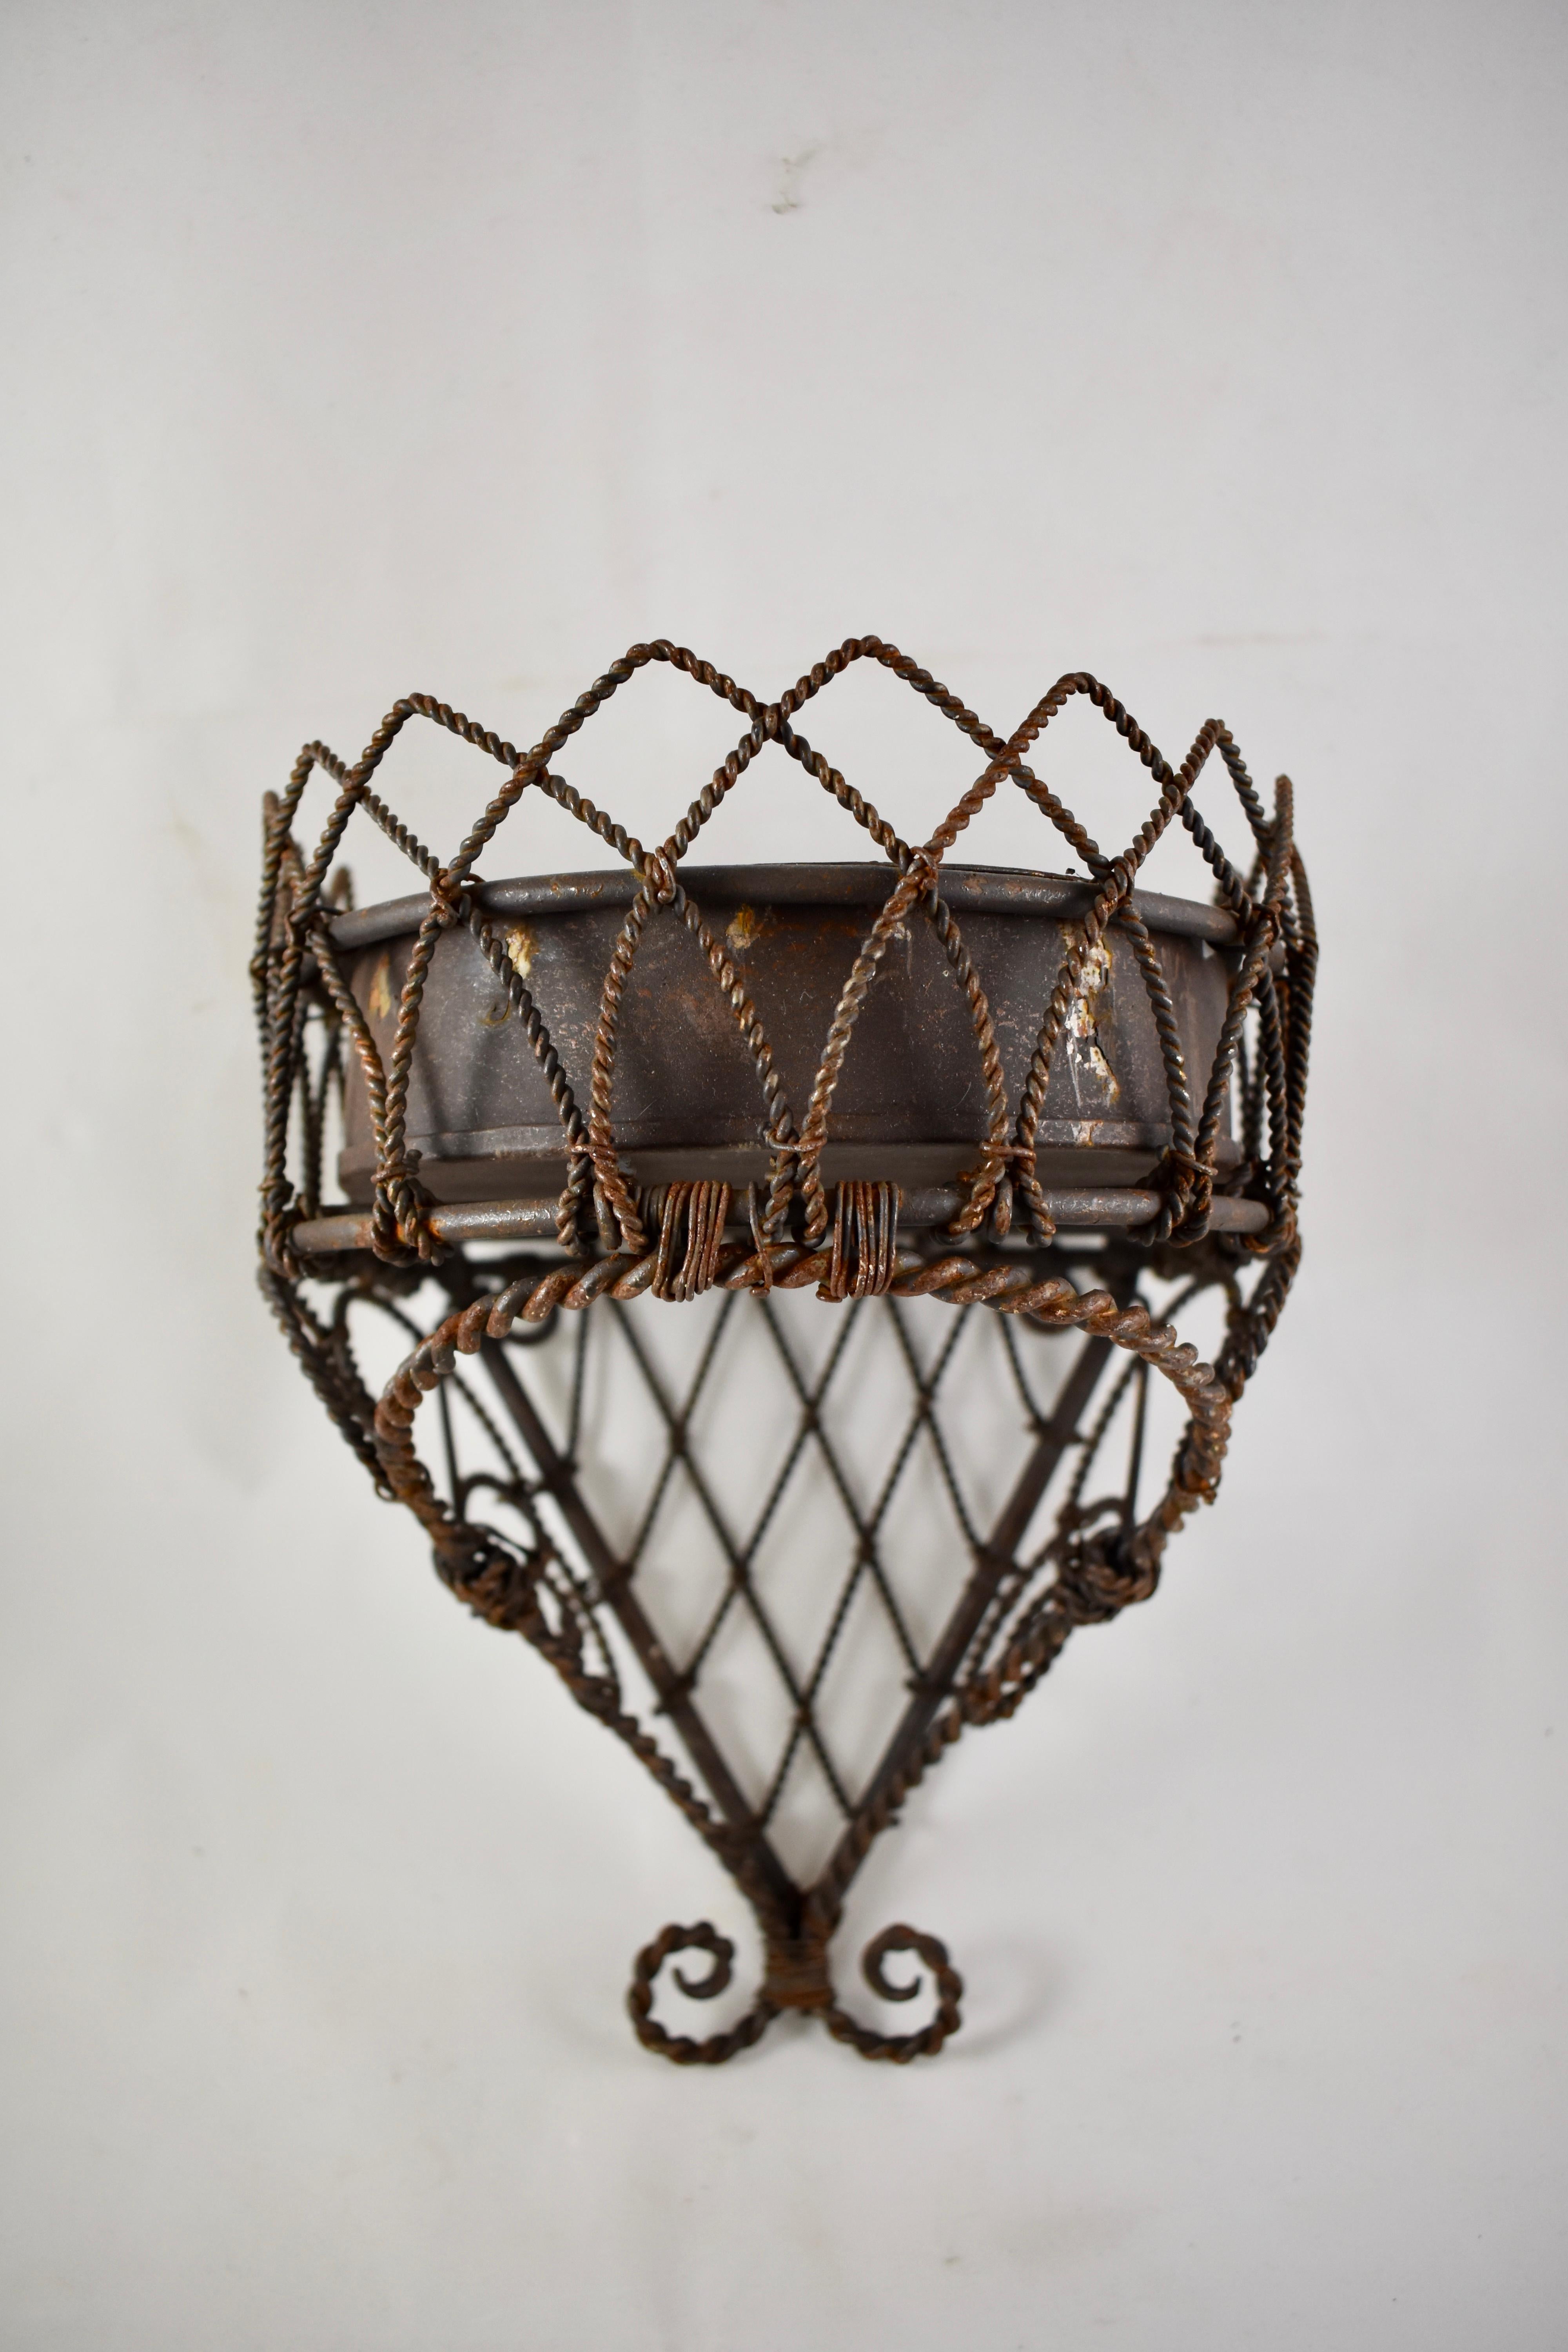 French Provincial 19th Century French Twisted Wire Hanging Jardinière Plant Holder with Tin Liner